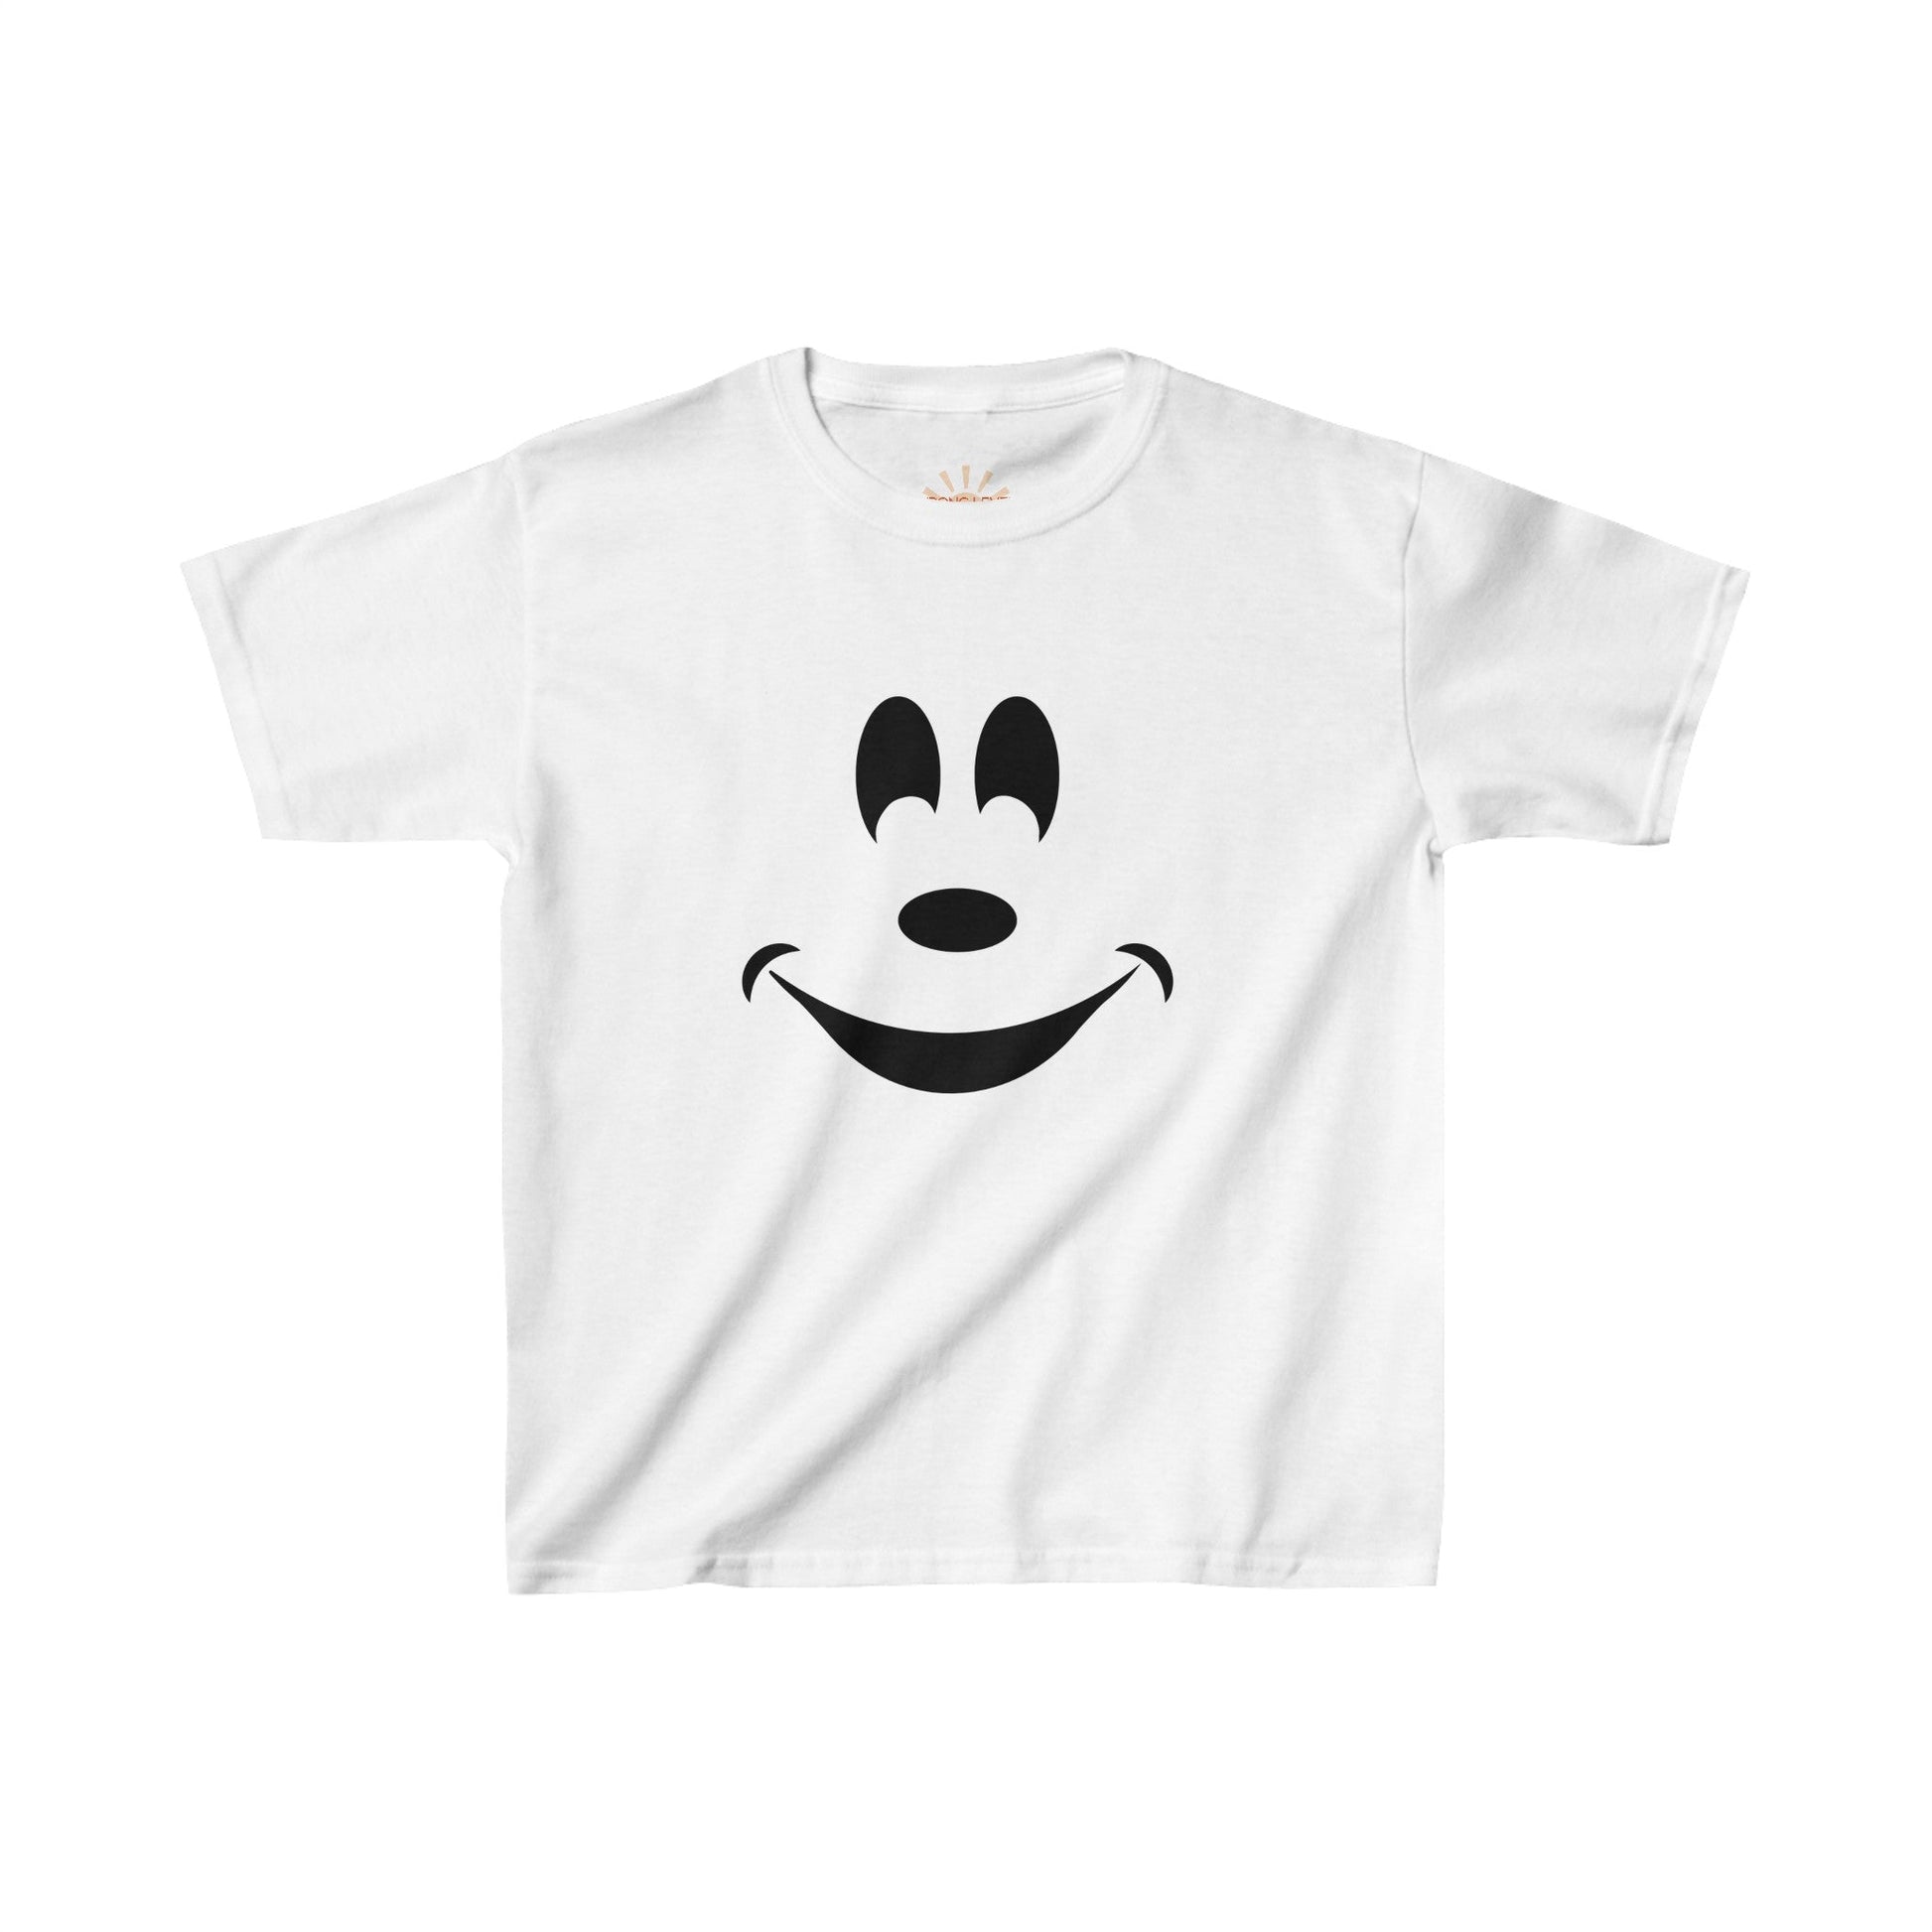 Boo to You Kids Heavy Cotton™ Tee adult Mickey mouseCottonKids clothesWrong Lever Clothing